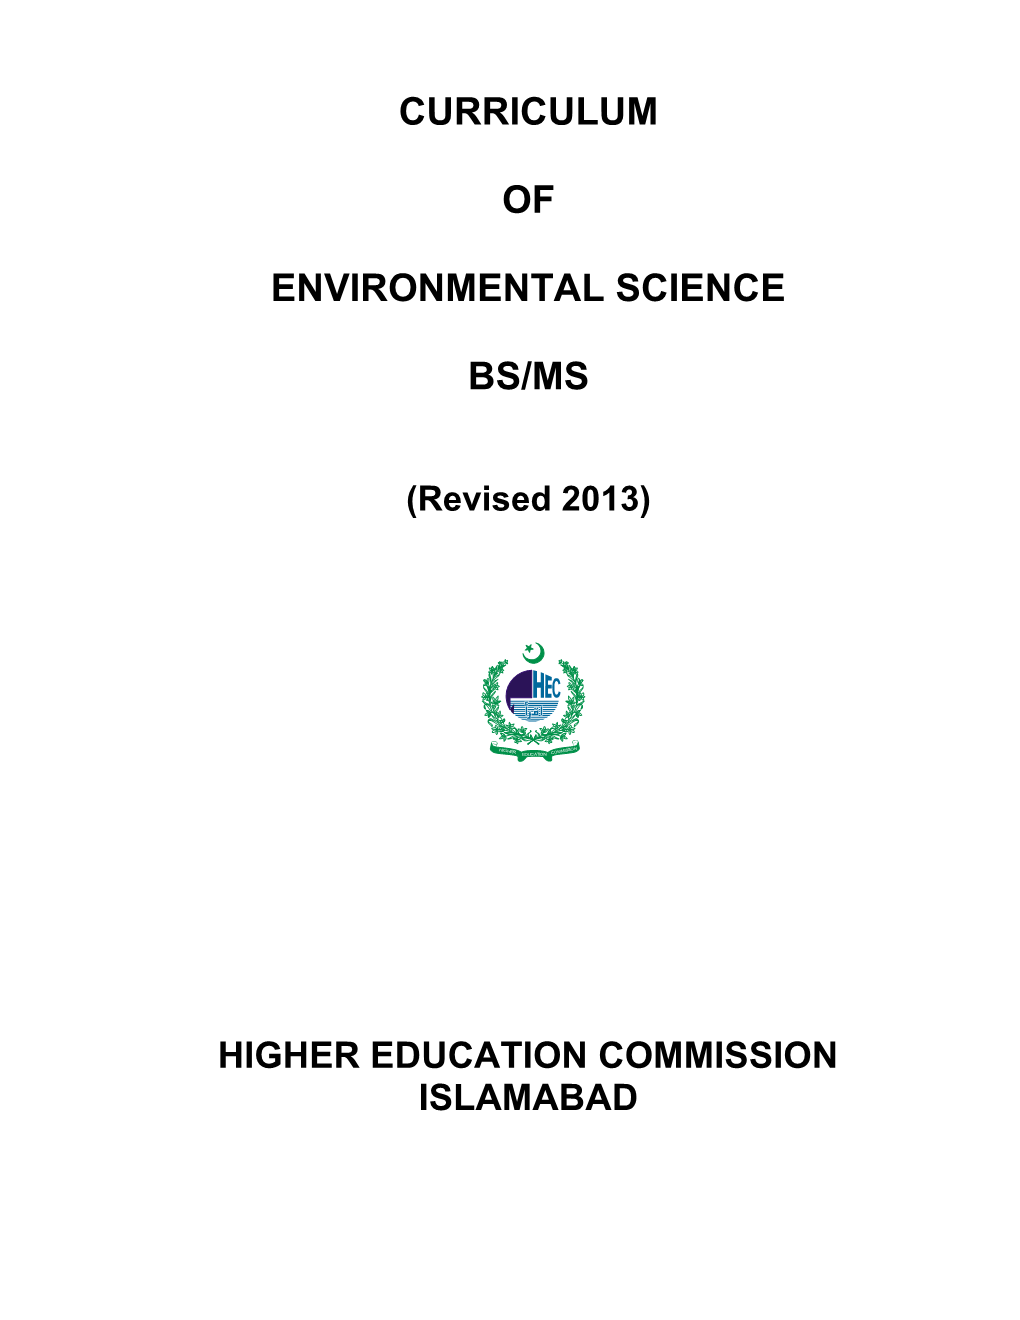 Curriculum of Environmental Science Bs/Ms